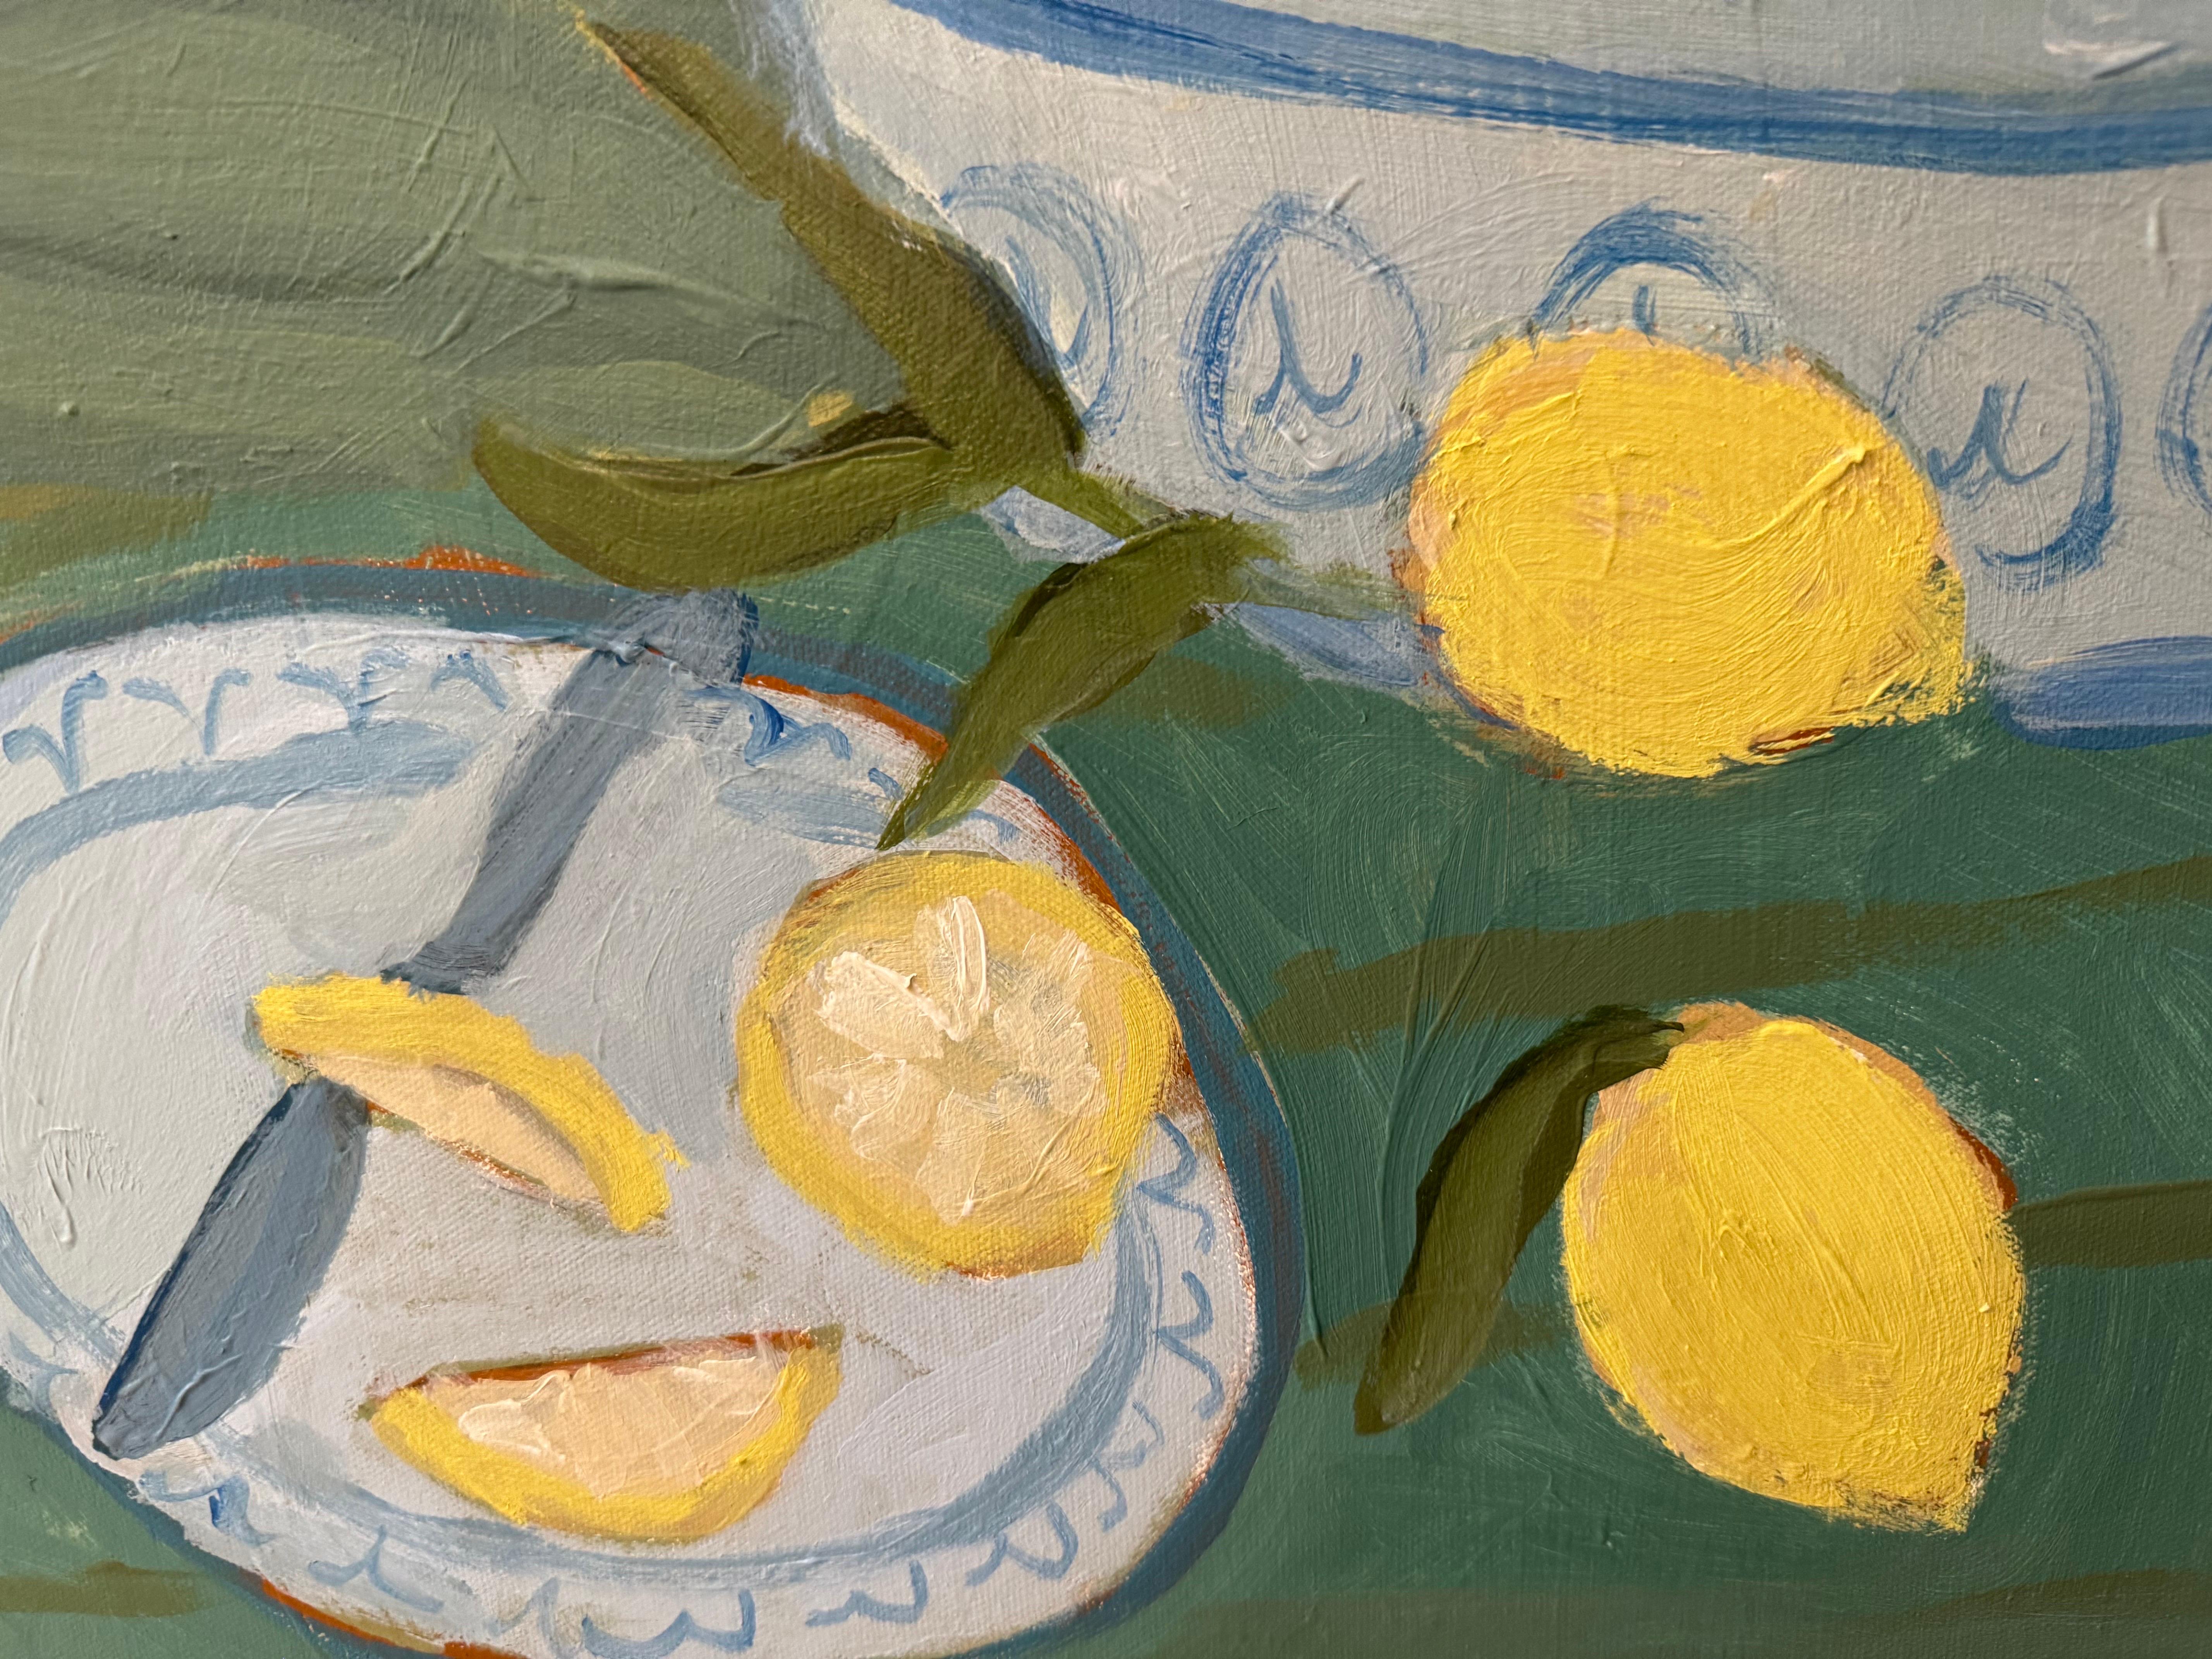 Limoncello by Laura McCarty, Large Square Framed Contemporary Still Life  4